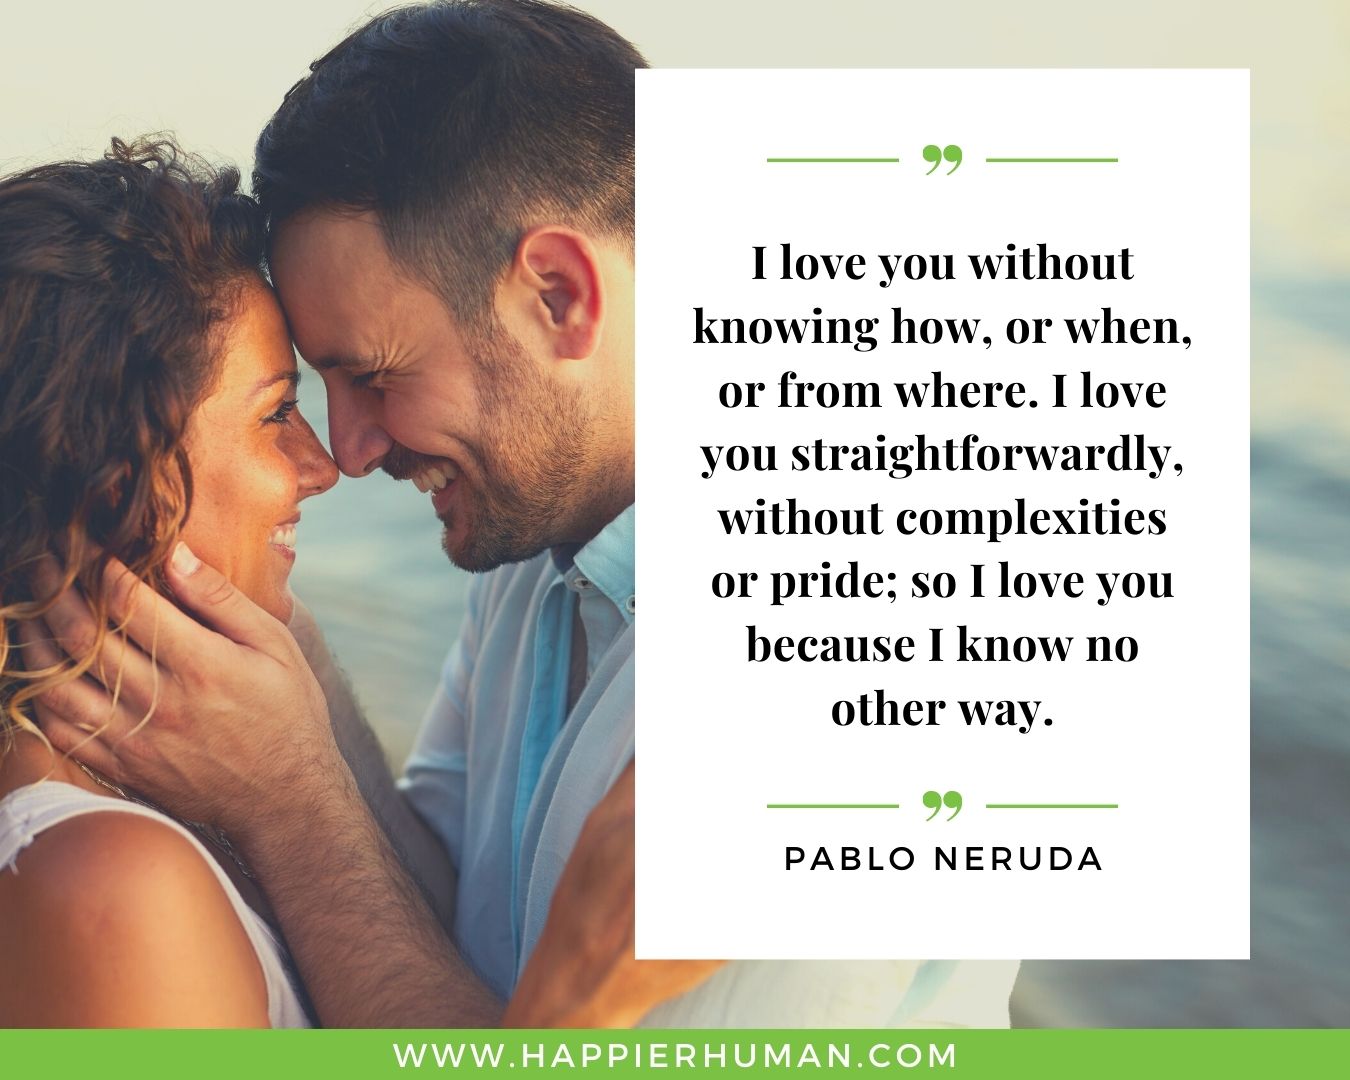 Unconditional Love Quotes for Her - “I love you without knowing how, or when, or from where. I love you straightforwardly, without complexities or pride; so I love you because I know no other way.” – Pablo Neruda